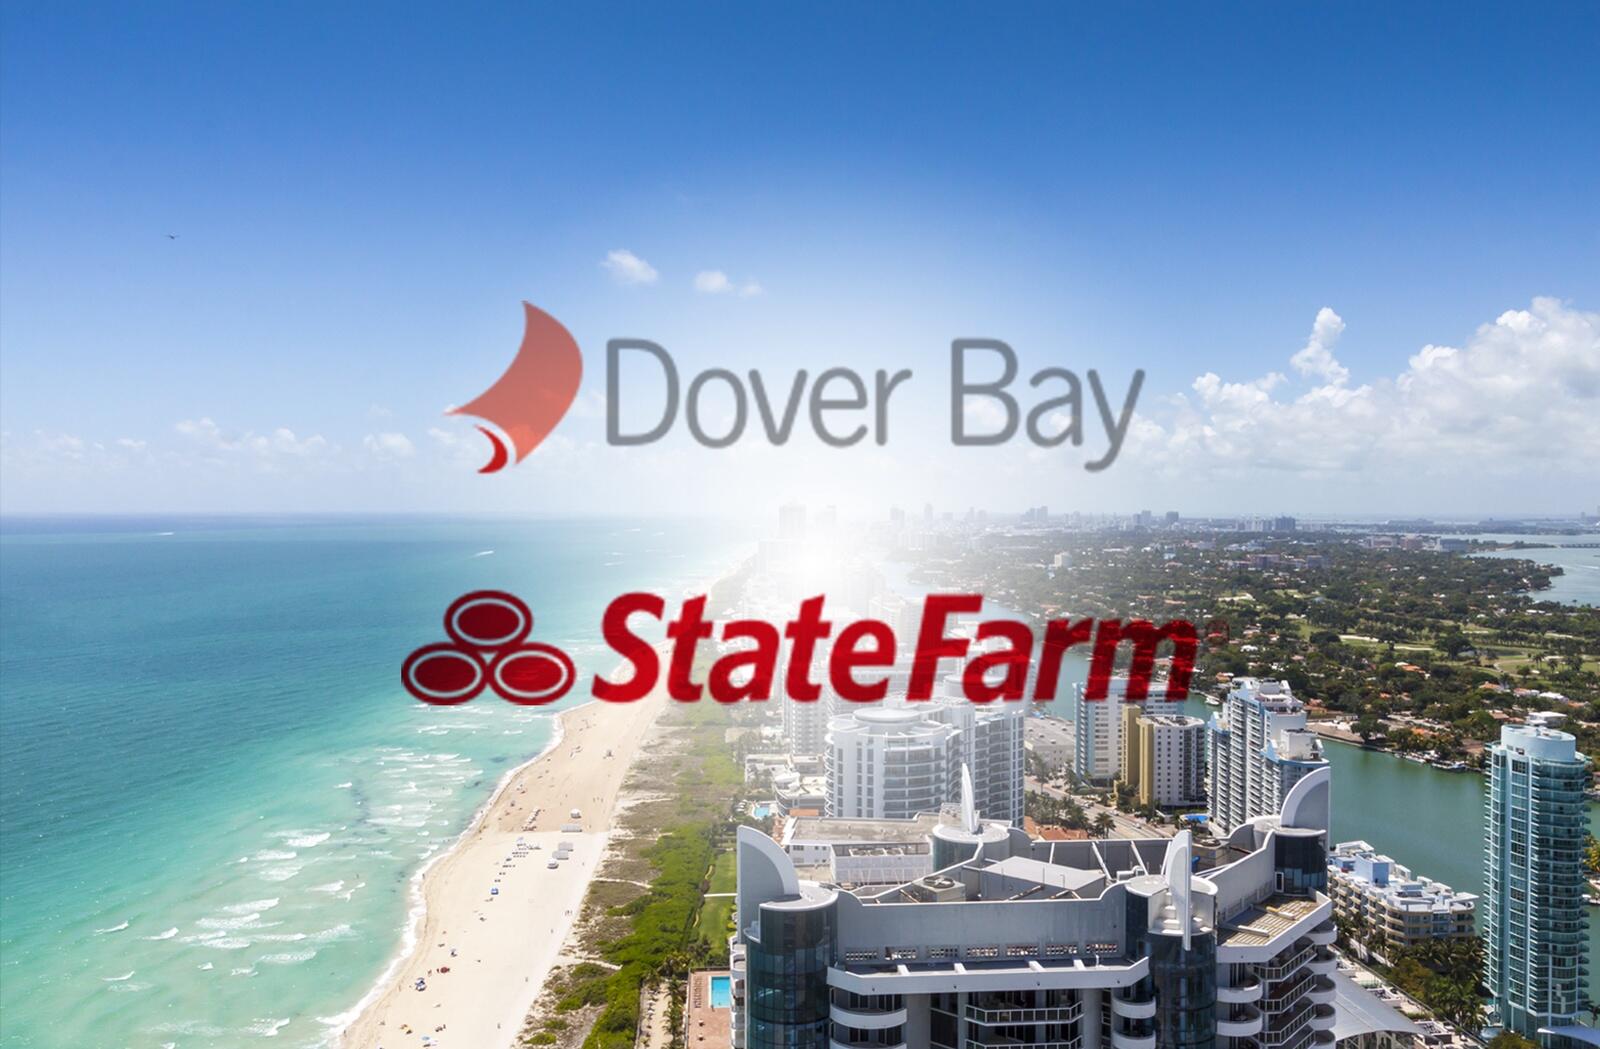 Dover Bay and State Farm